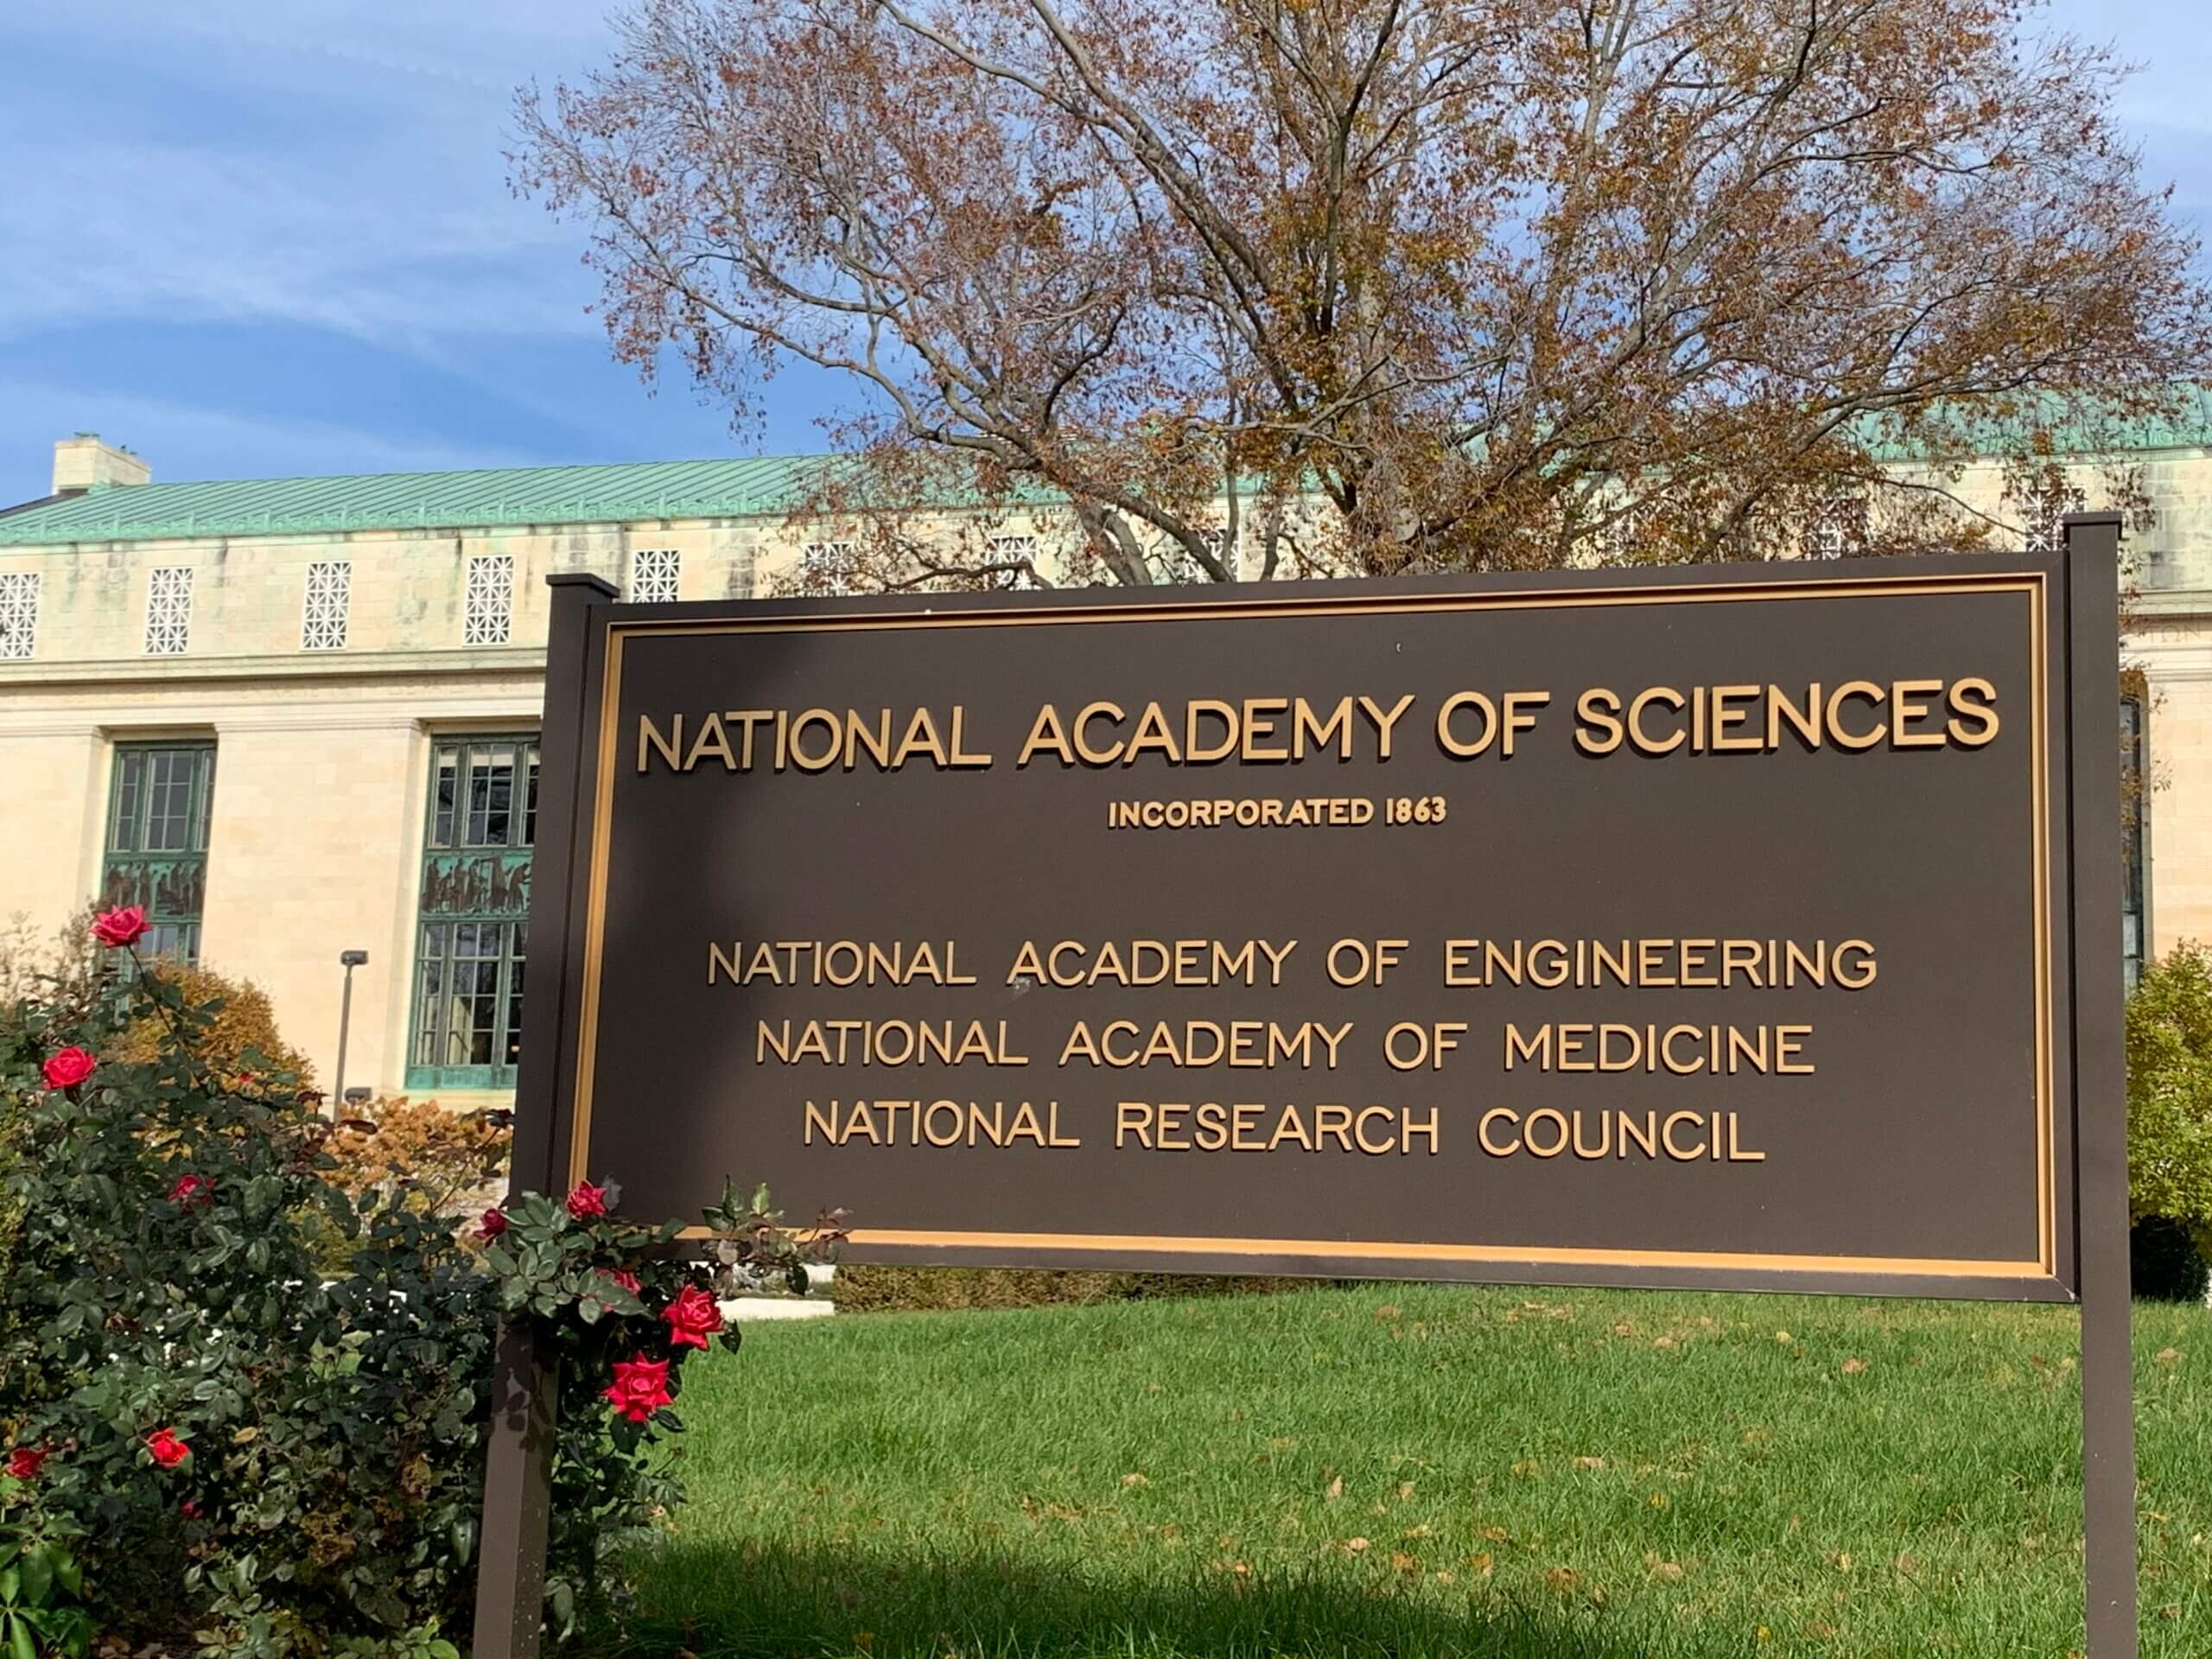 The sign of the National Academy of Sciences